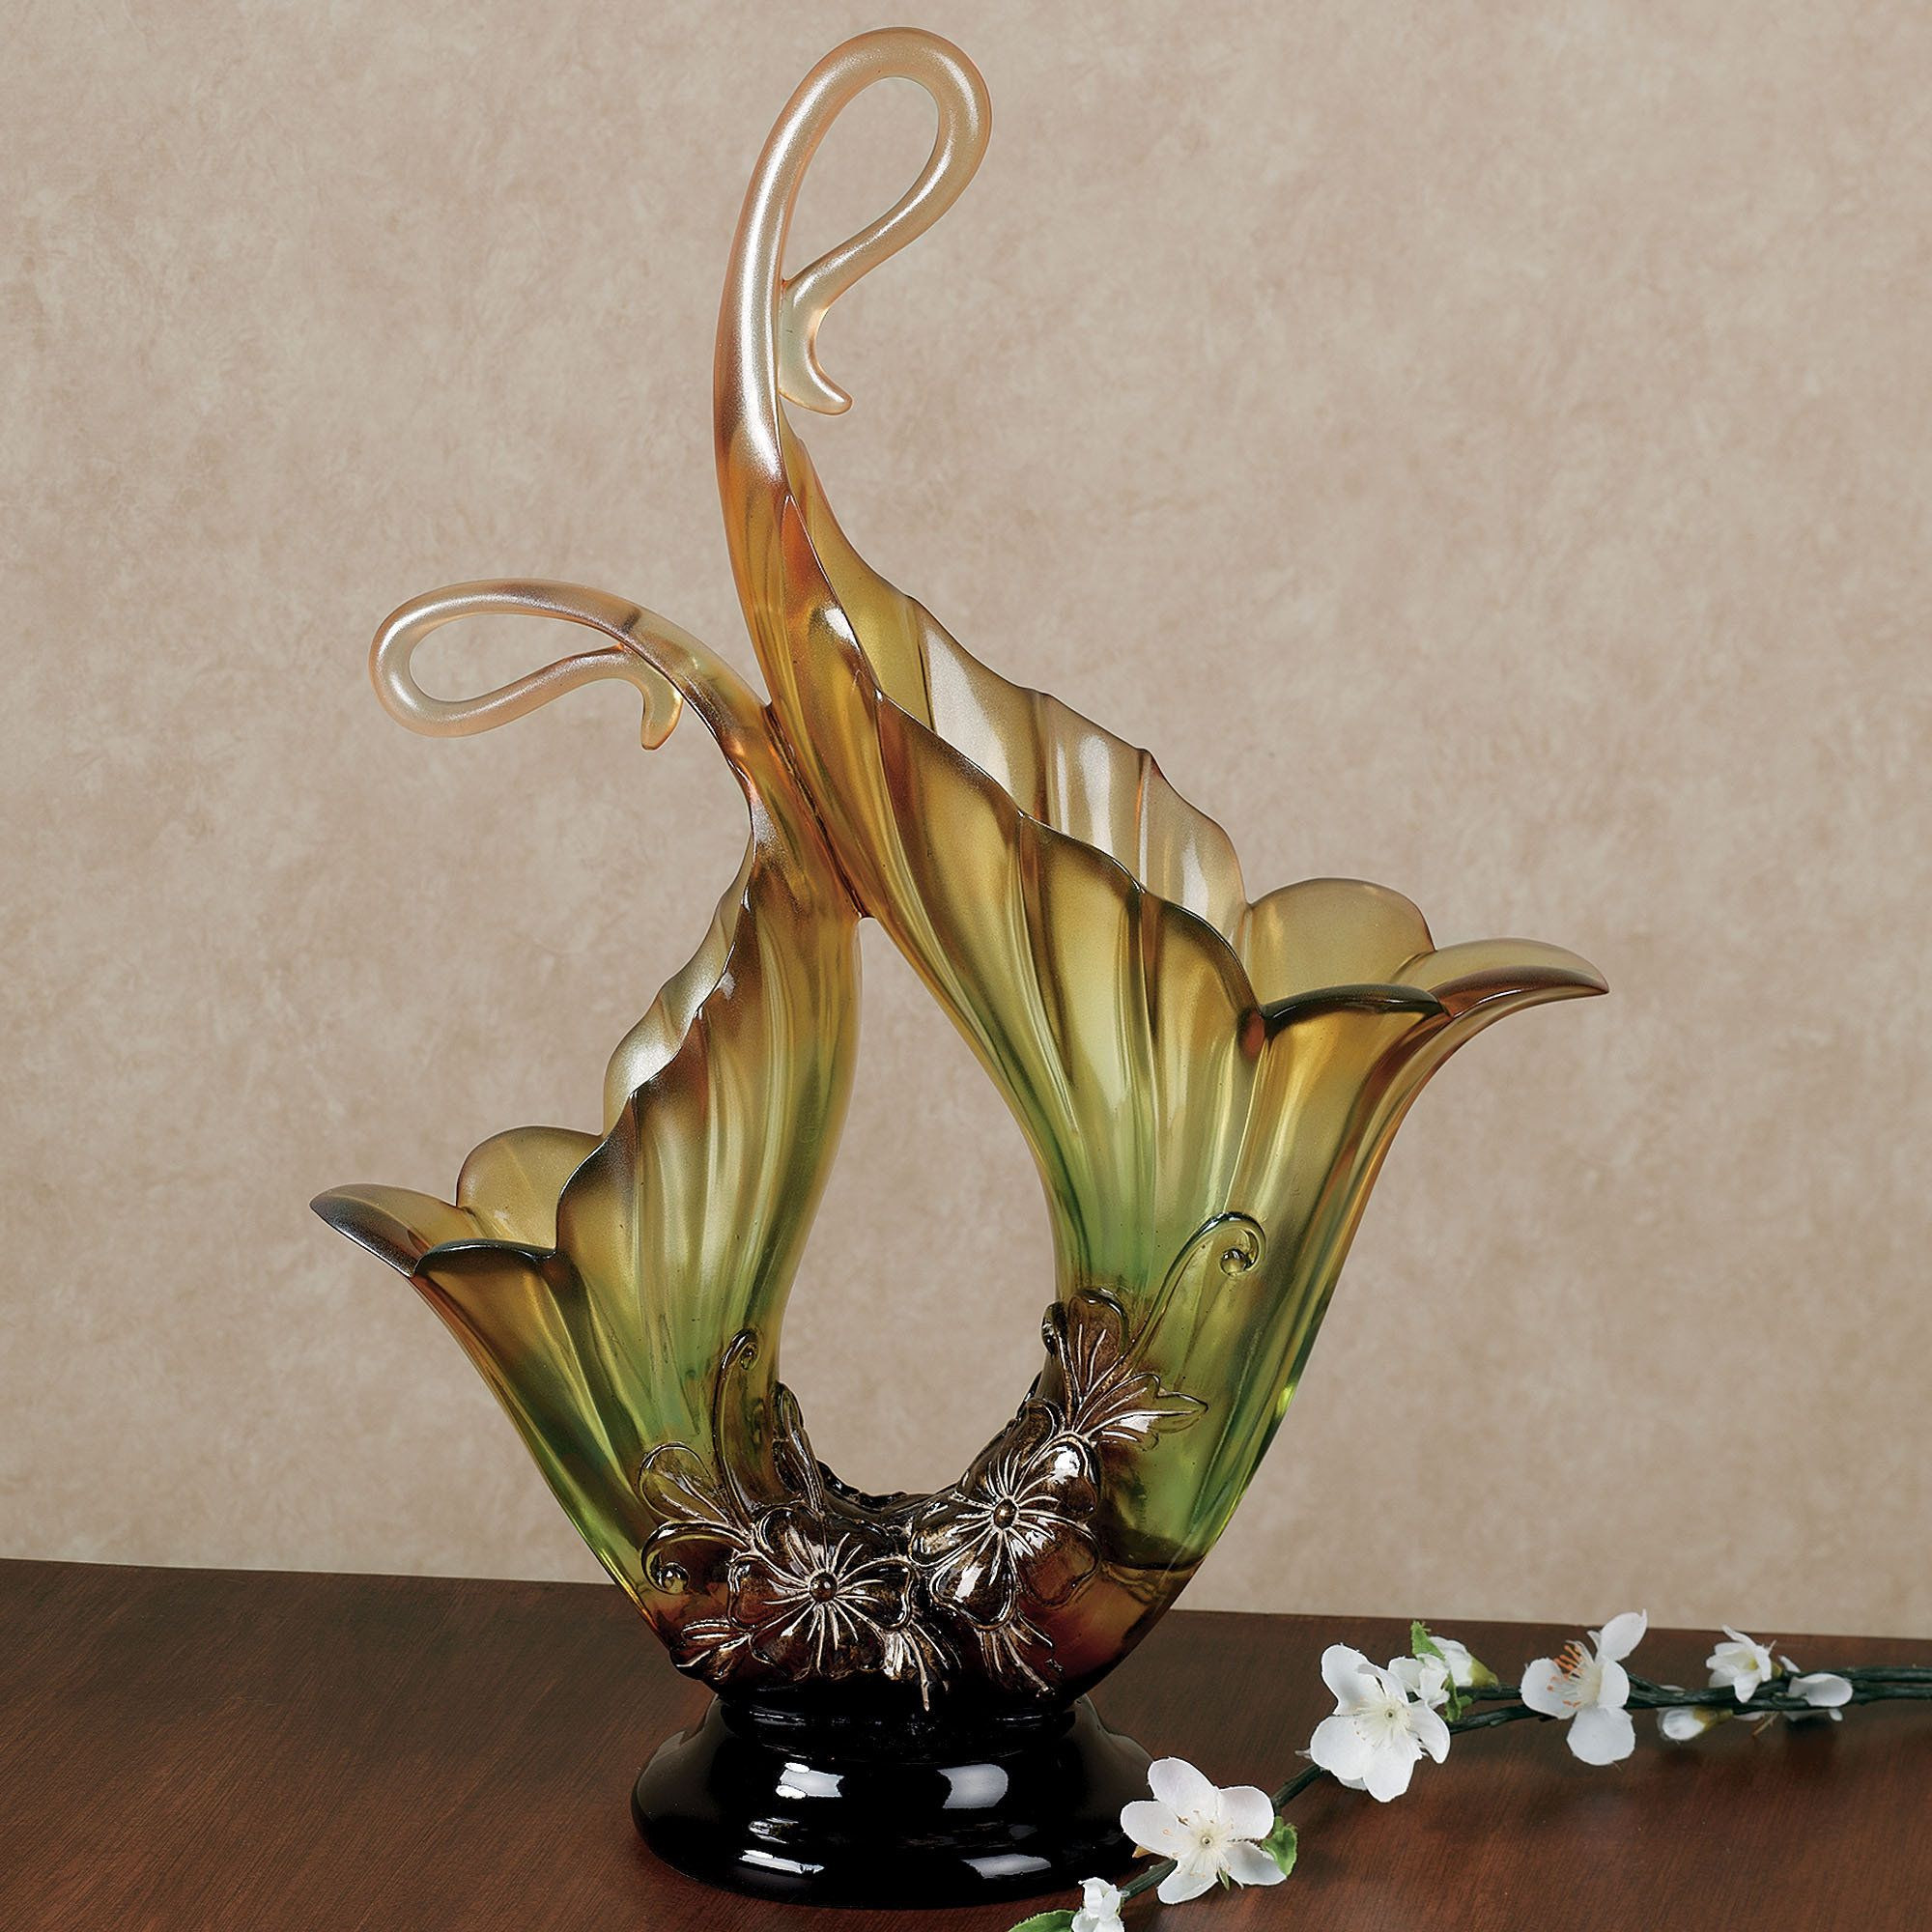 30 Stylish Dark Green Vase 2023 free download dark green vase of rare exotics vase objets dart pinterest clear resin light throughout let the fanciful joy of the season brighten your home with the rare exotics vase uniquely shaped clear